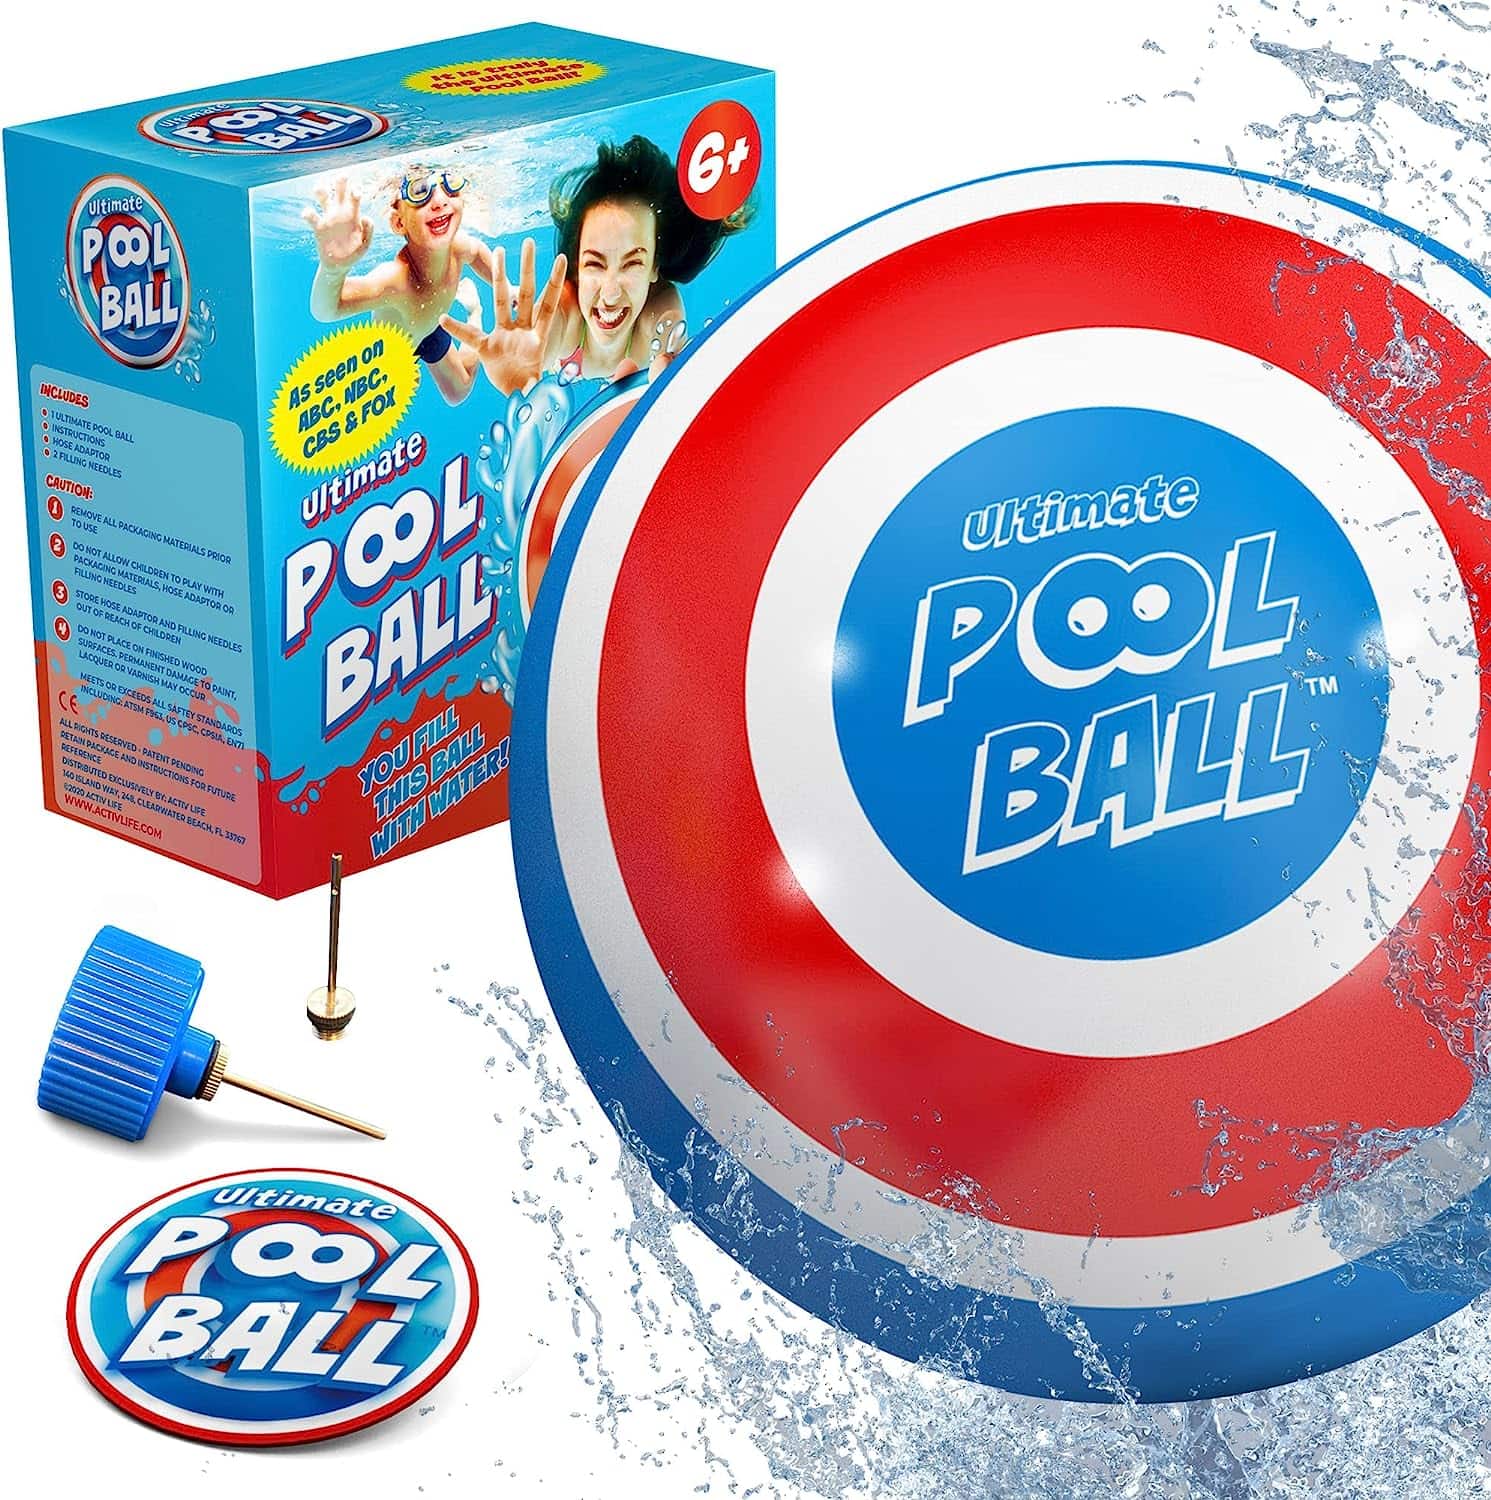 Pool ball in red, white, and blue 